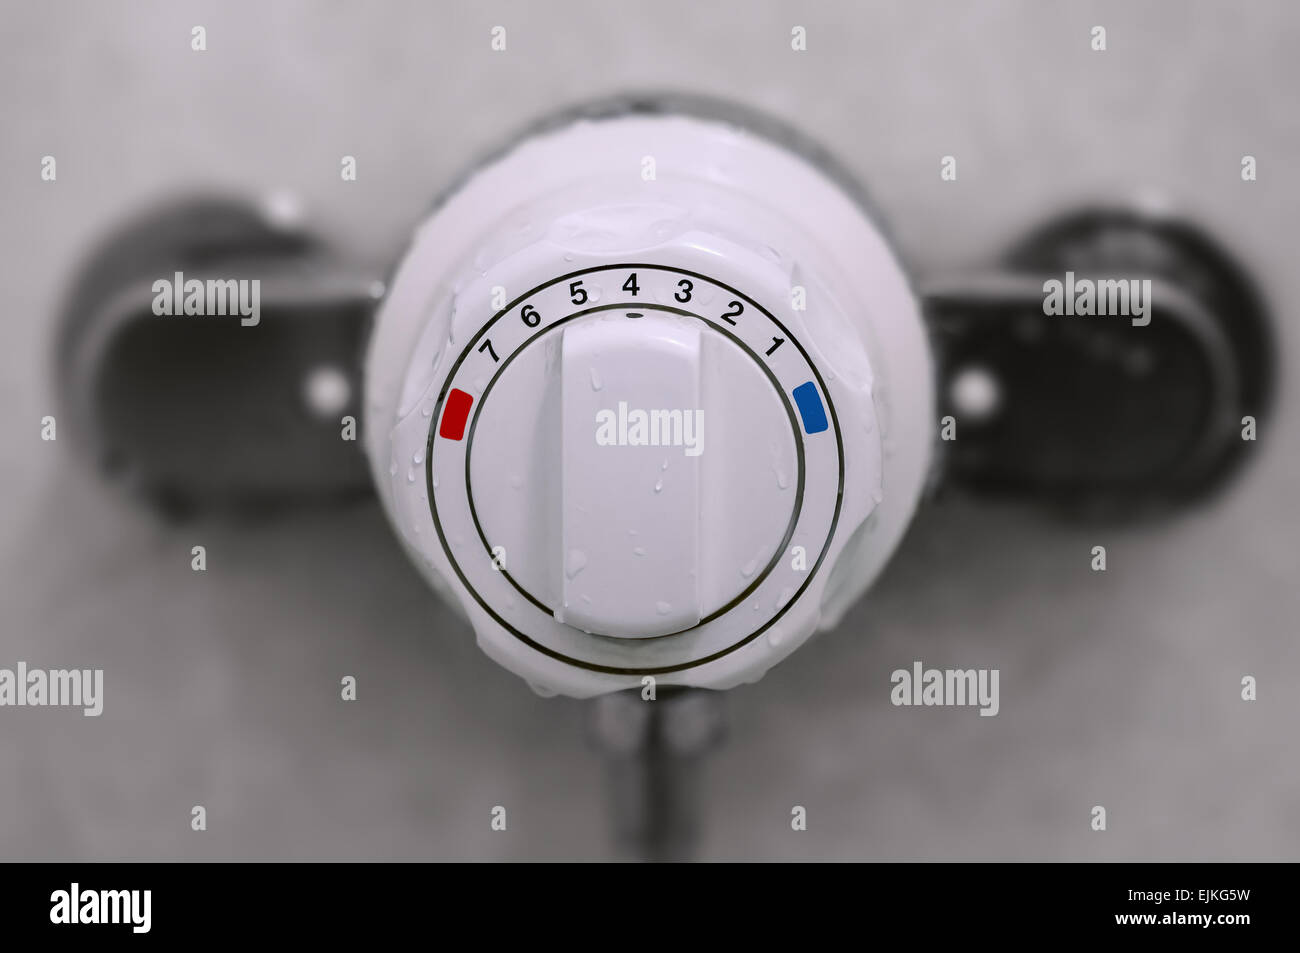 Shower thermostatic power and heat controller close up Stock Photo